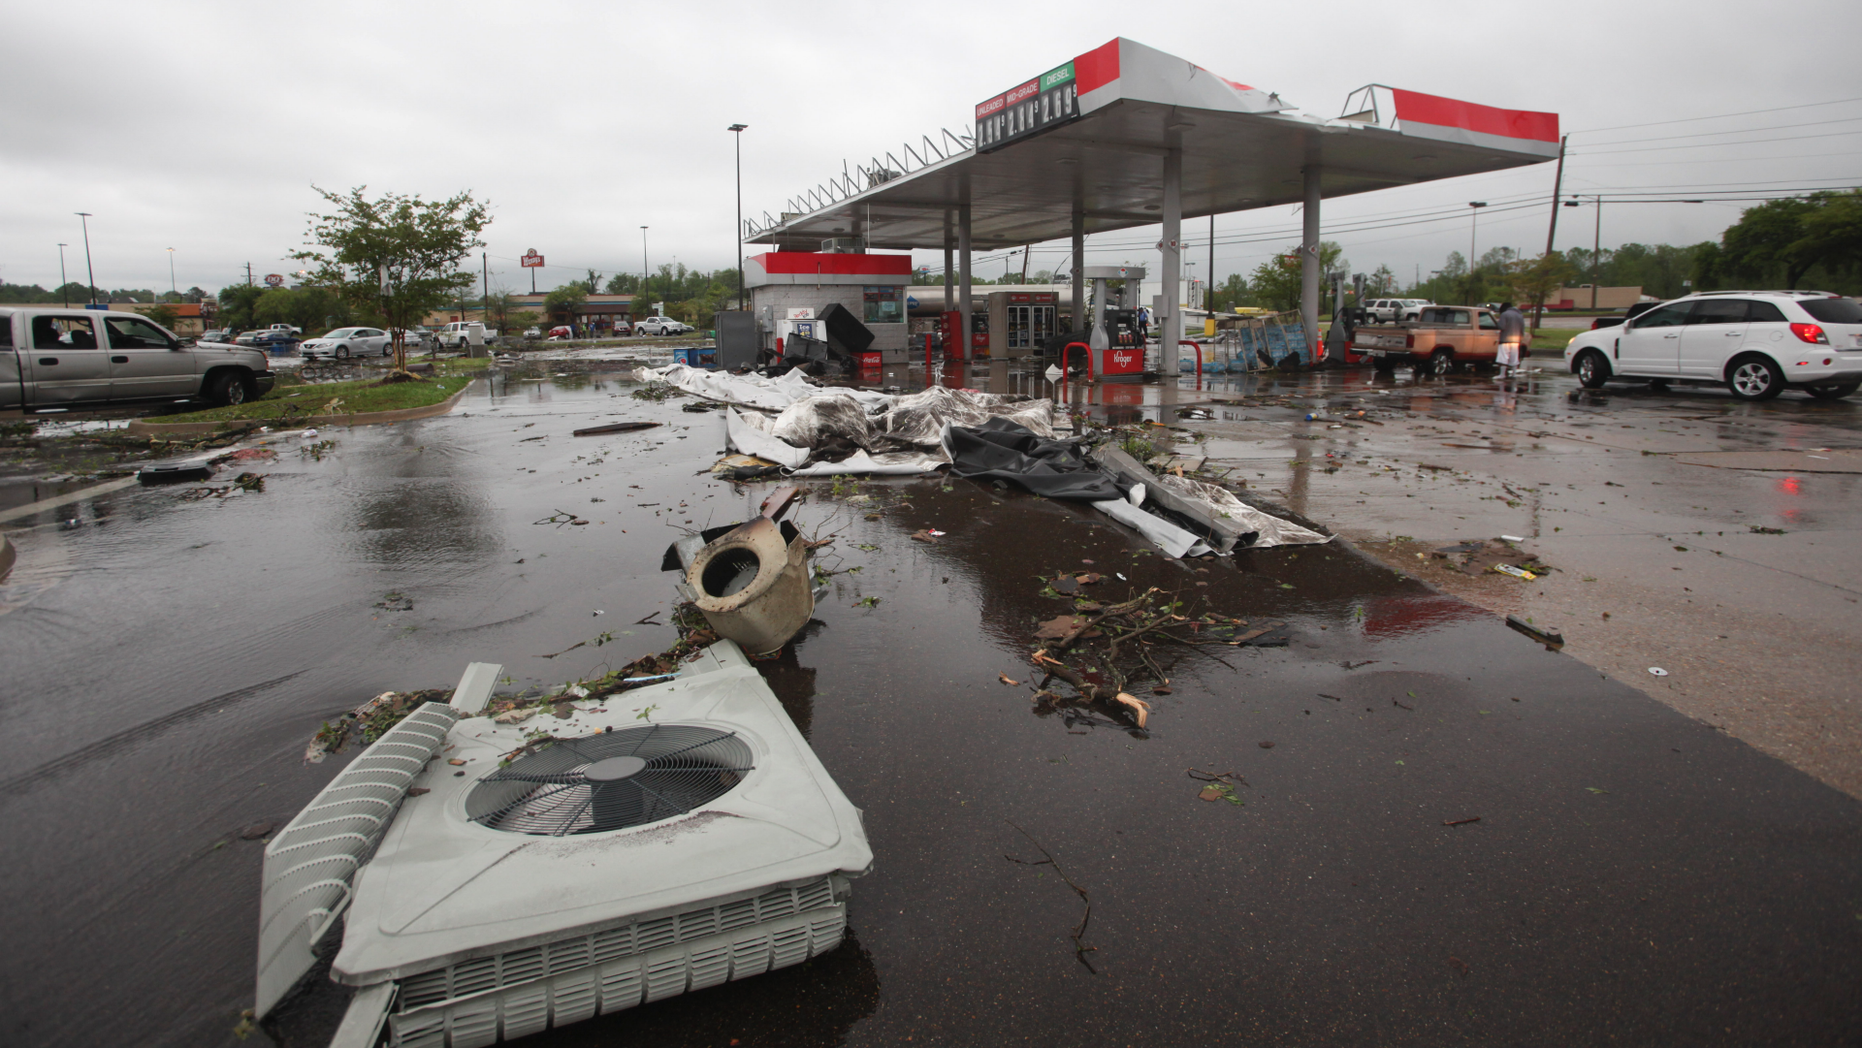 A service station is damaged as a result of extreme weather conditions on Saturday, April 13, 2019 in Vicksburg, Miss. Authorities say that a possible tornado has fallen on the west of Mississippi, causing damage to several businesses and vehicles. John Moore, a forecaster of the National Weather Service in Jackson, said that a twister had been reported Saturday in the Vicksburg, Mississippi area, and that it was indicated on the radar. (Courtland Wells / The Vicksburg Post via AP)